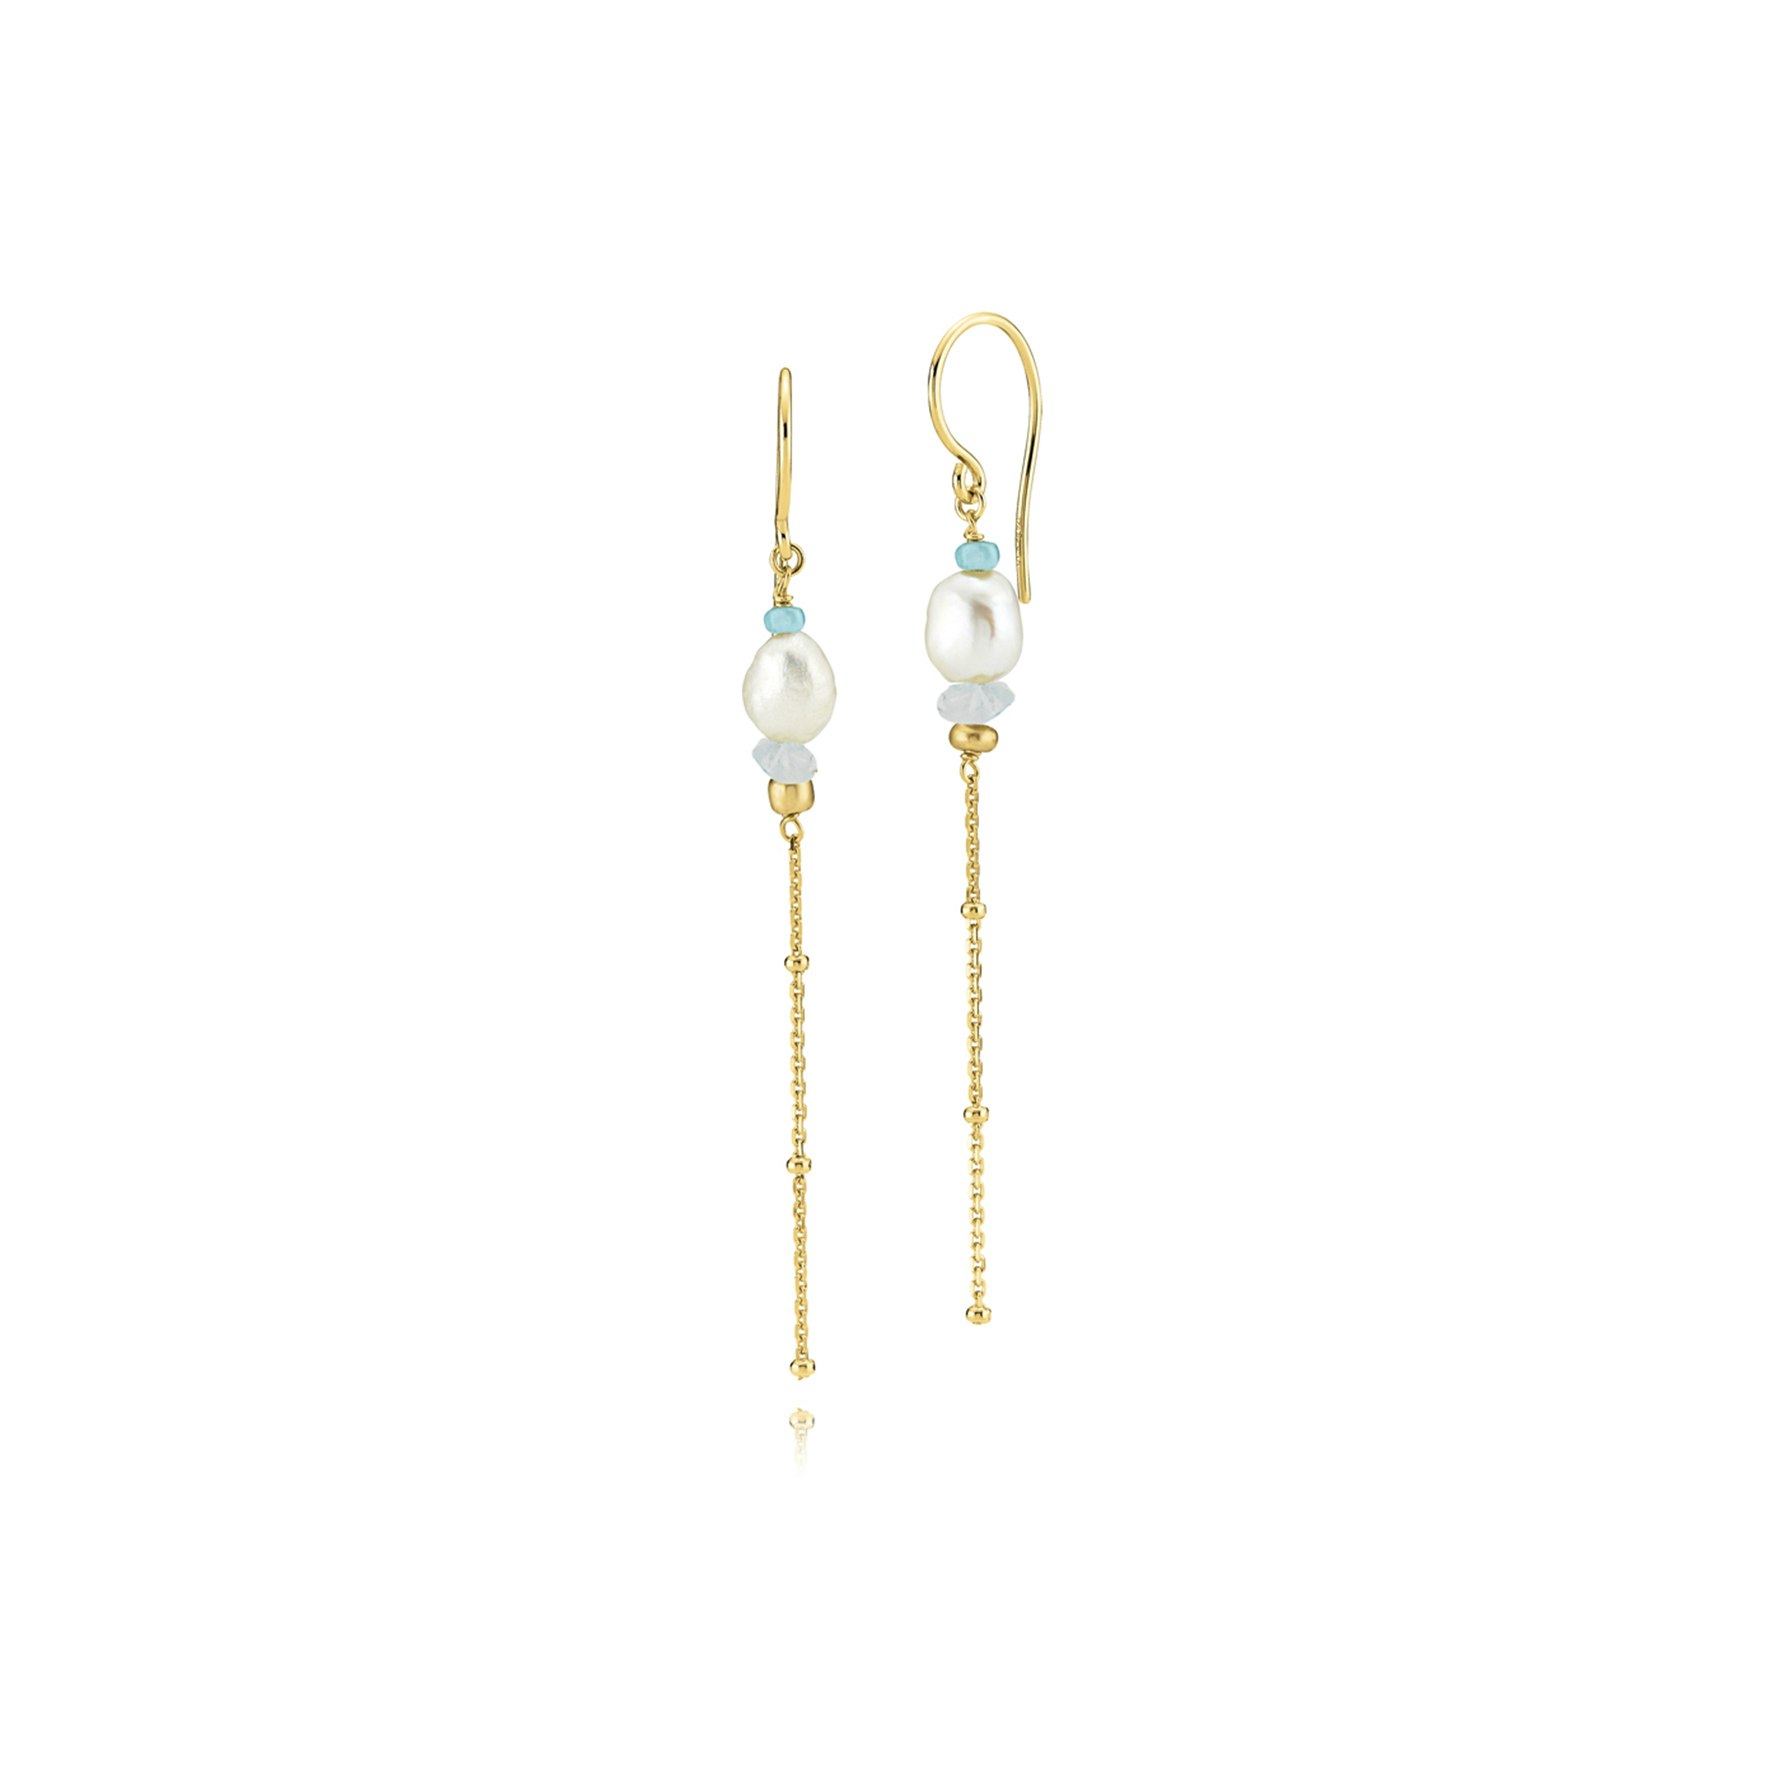 Beach Earrings Blue With Pearl from Sistie in Goldplated-Silver Sterling 925